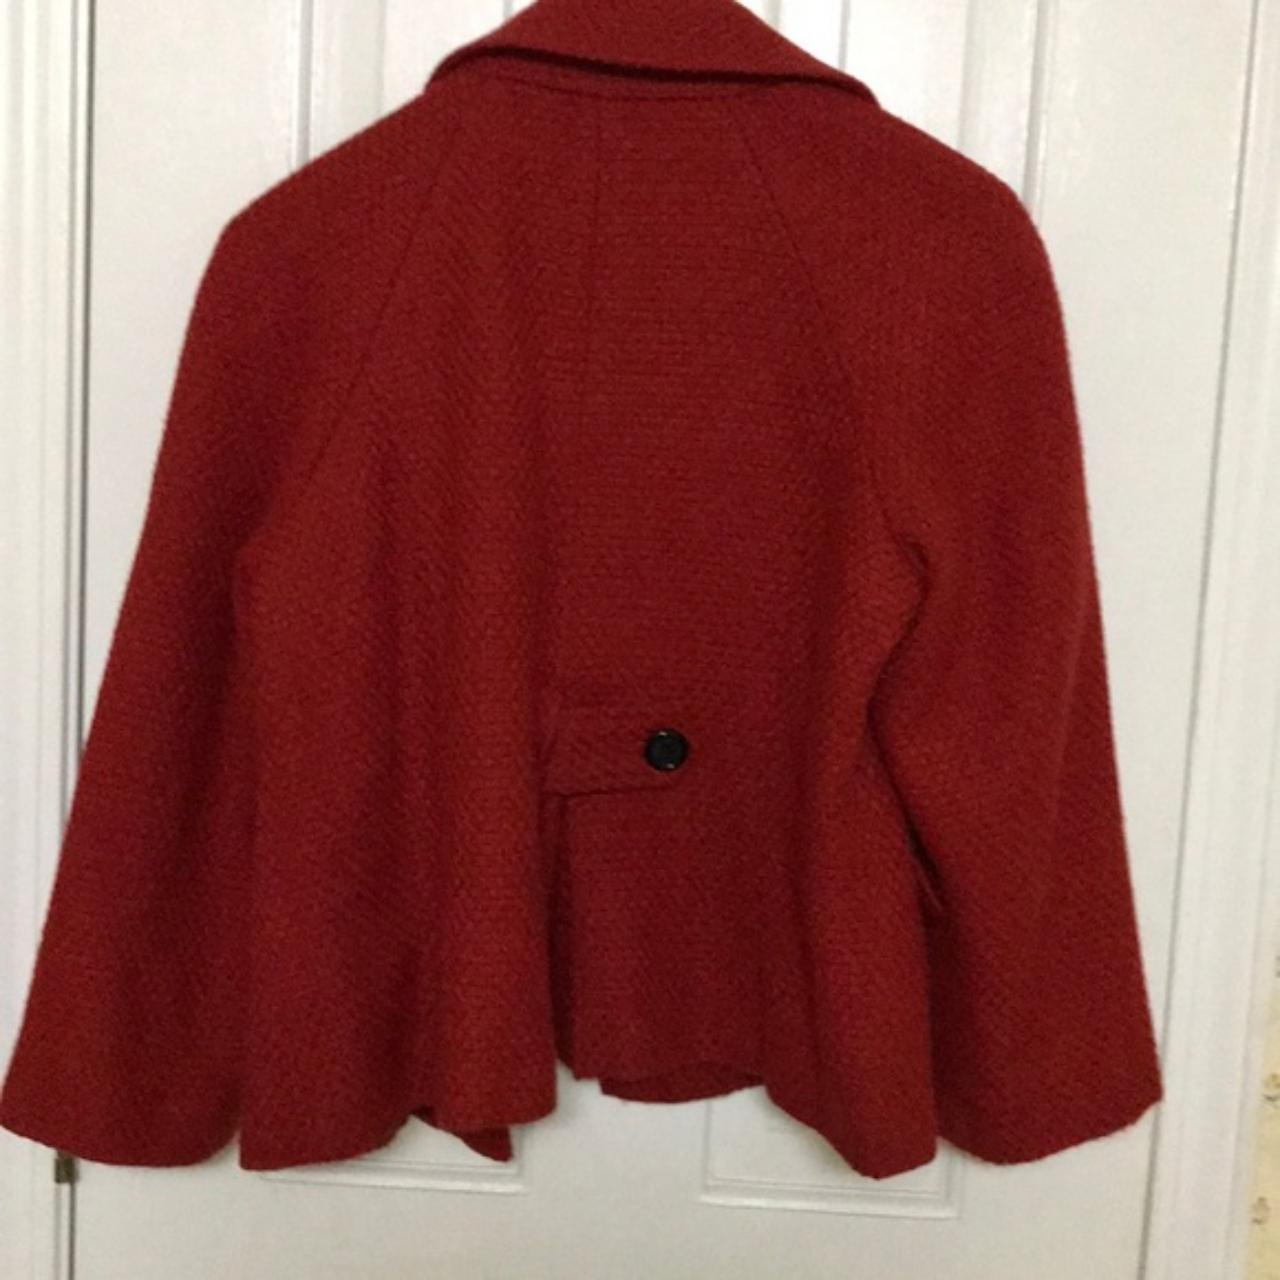 Women's Red and Black Coat (4)